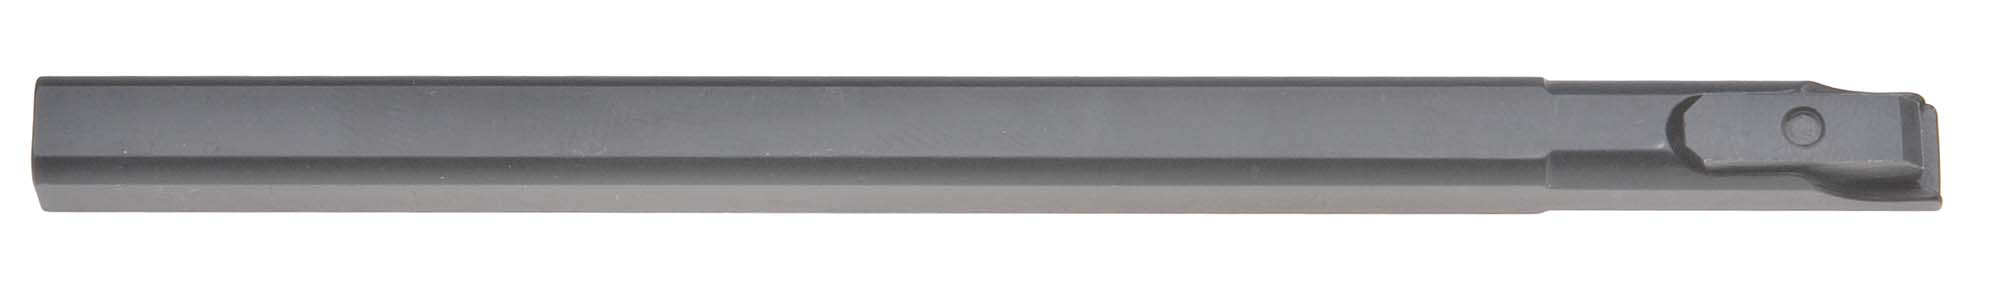 1/2" Mecabore Style Boring Bar